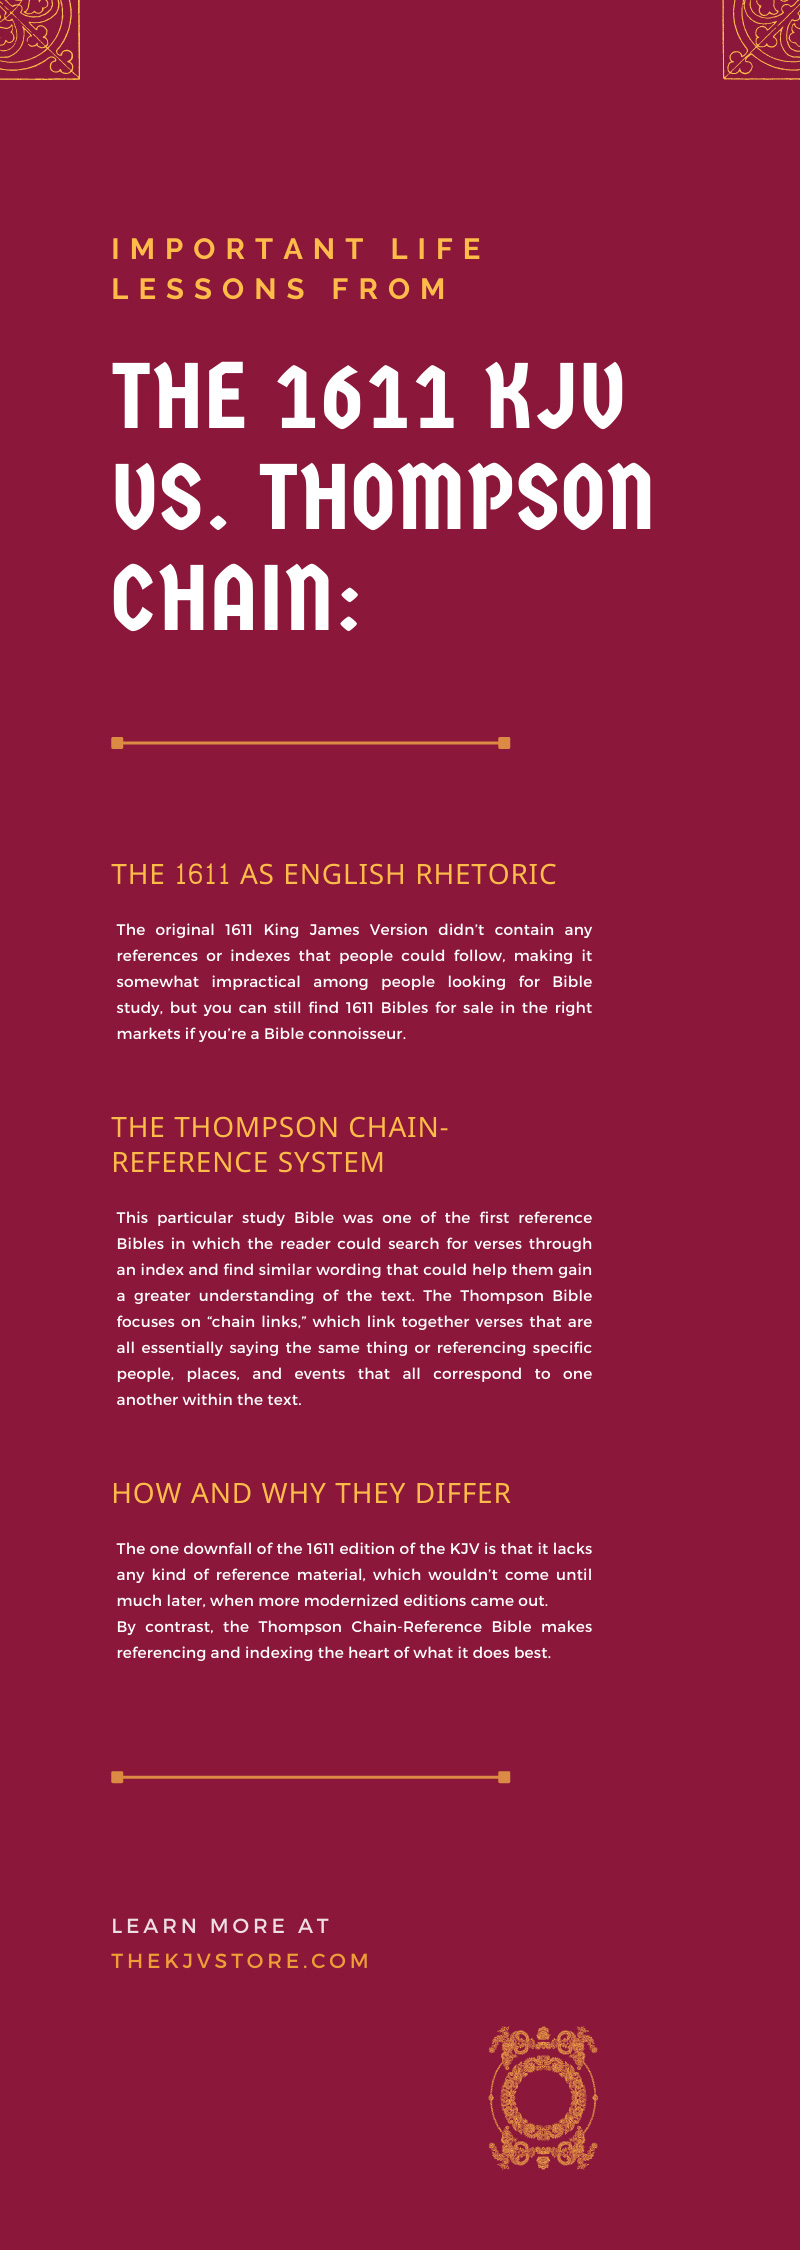 The 1611 KJV vs. Thompson Chain: What’s the Difference?